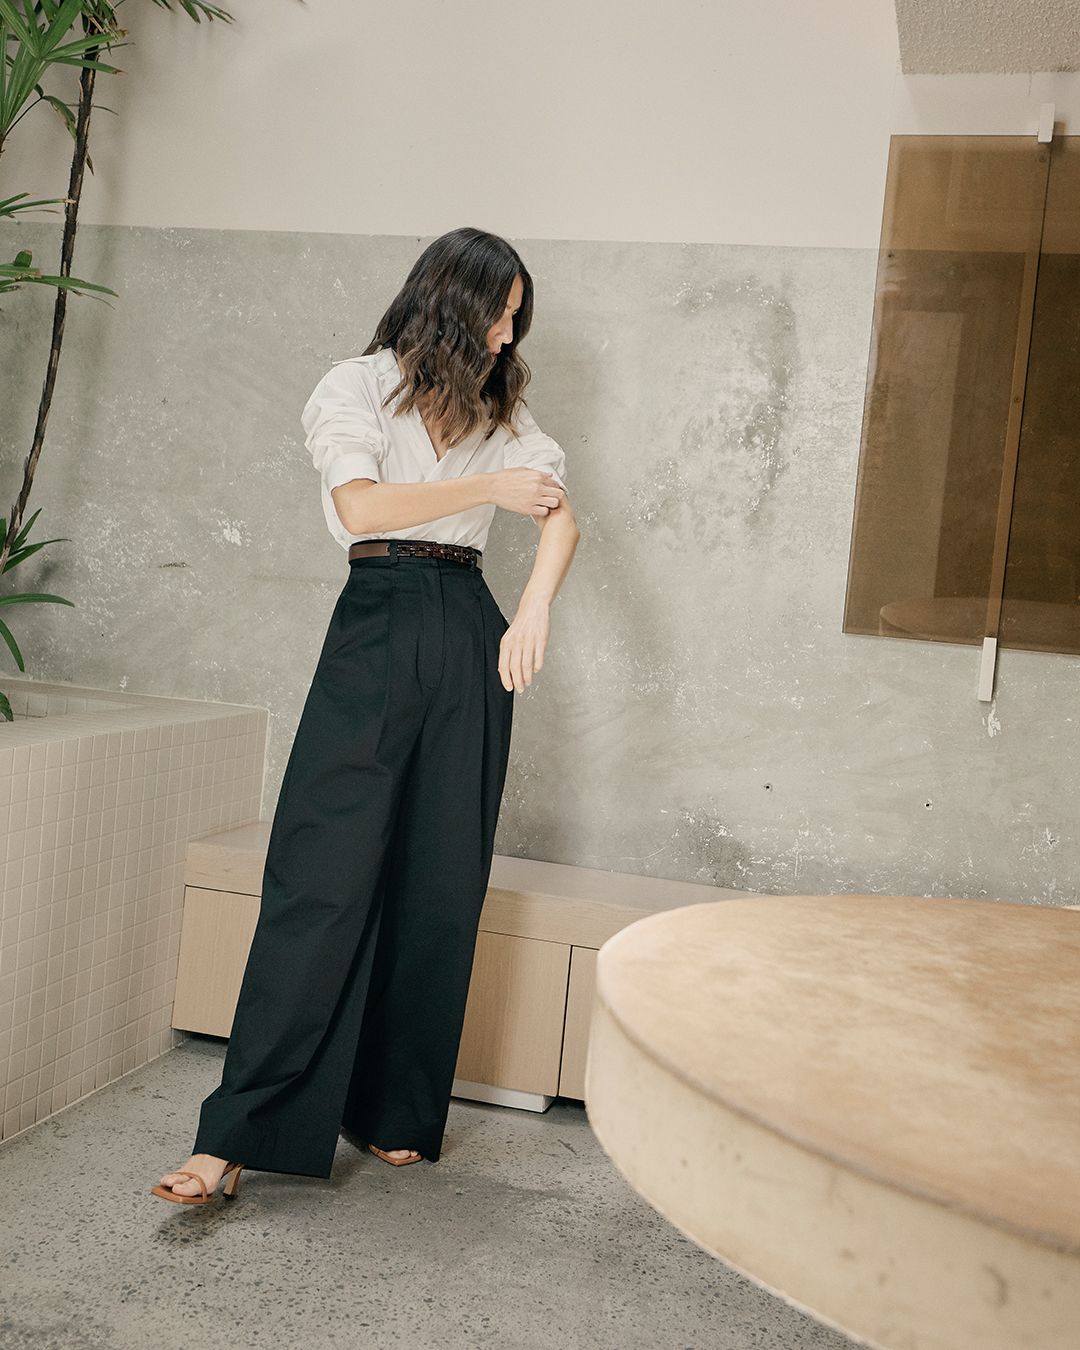 Bianca Marchi wearing a white shirt and black wide leg trousers candidly adjusting her sleeve